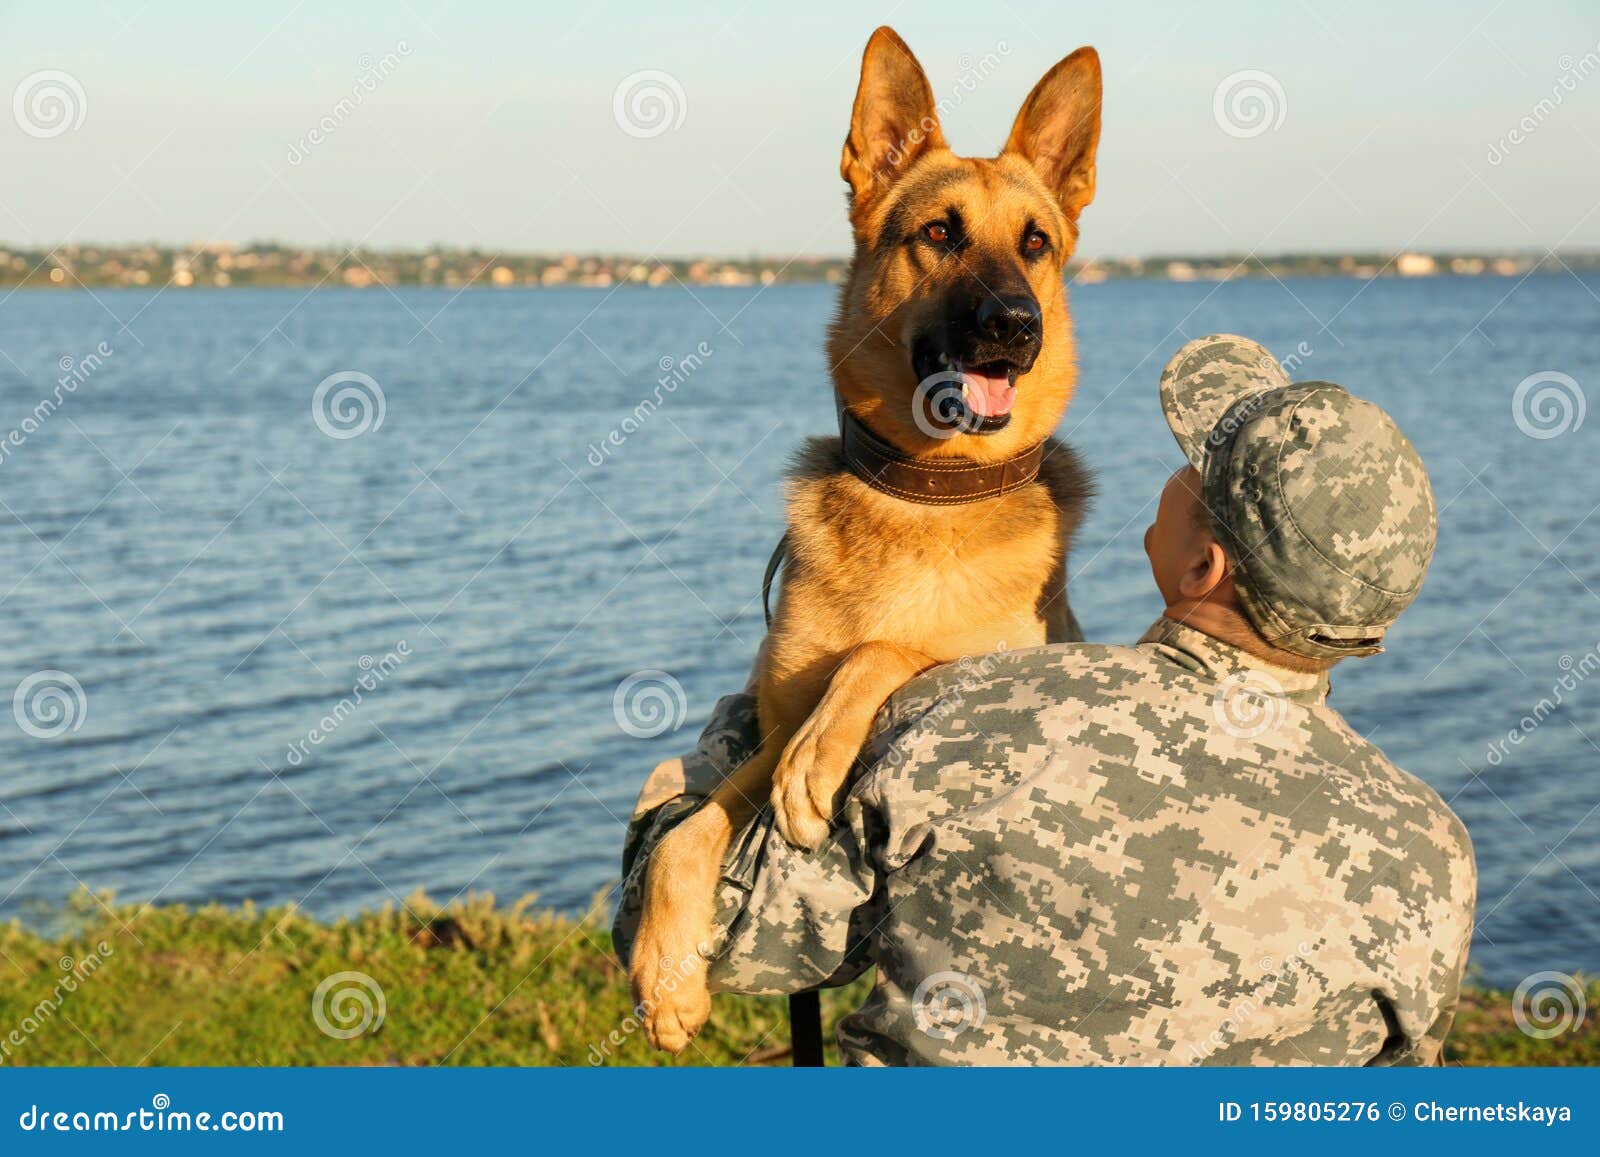 Man In Military Uniform With German Shepherd Dog Stock Photo Image Of Army Defender 159805276